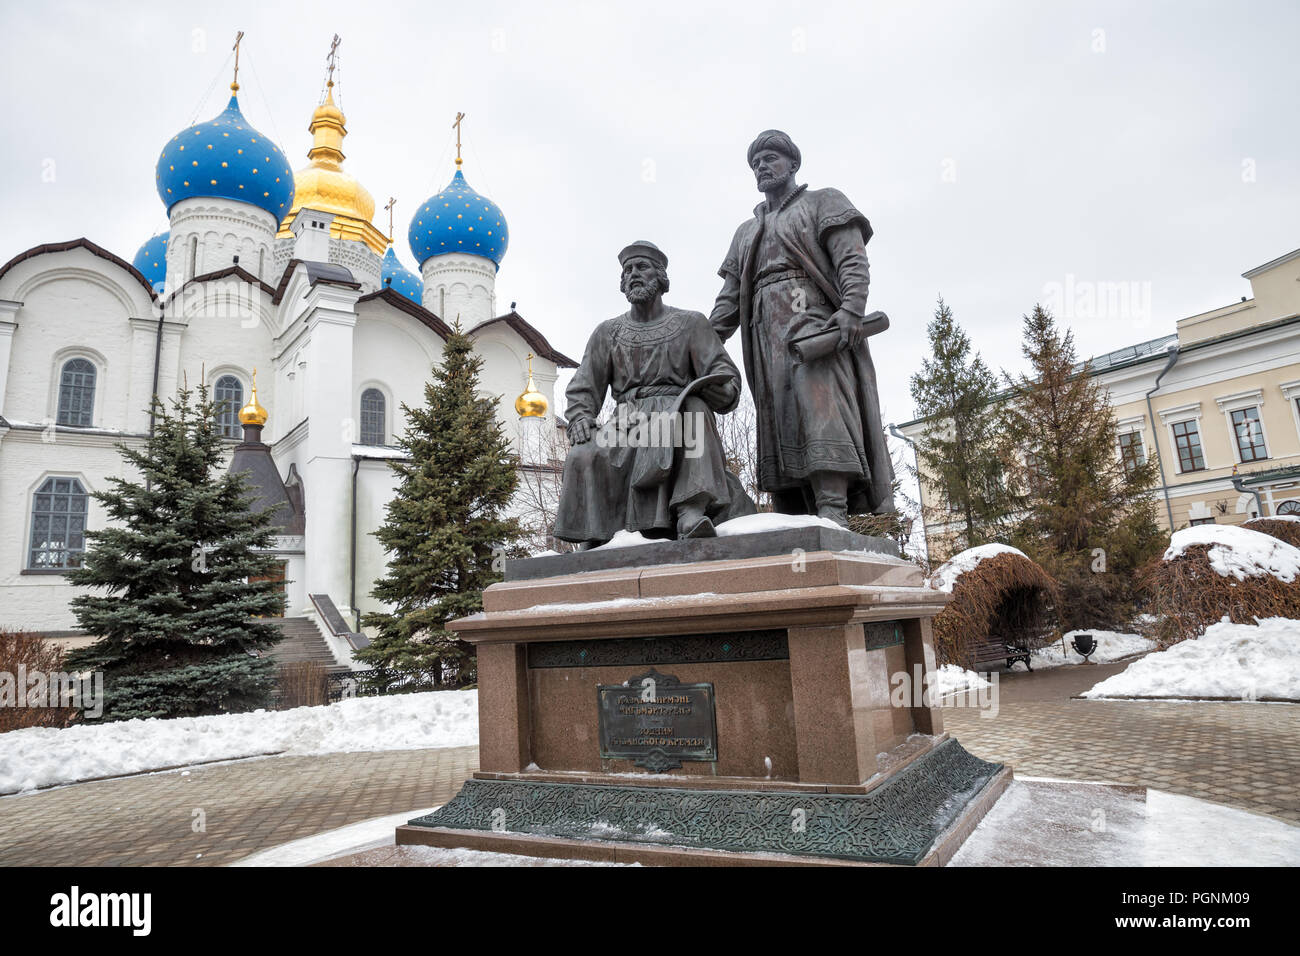 KAZAN, RUSSIA - JANUARY 03, 2018: monument to architect of Kazan Kremlin, created in 2003, against background of the Annunciation Cathedral Stock Photo